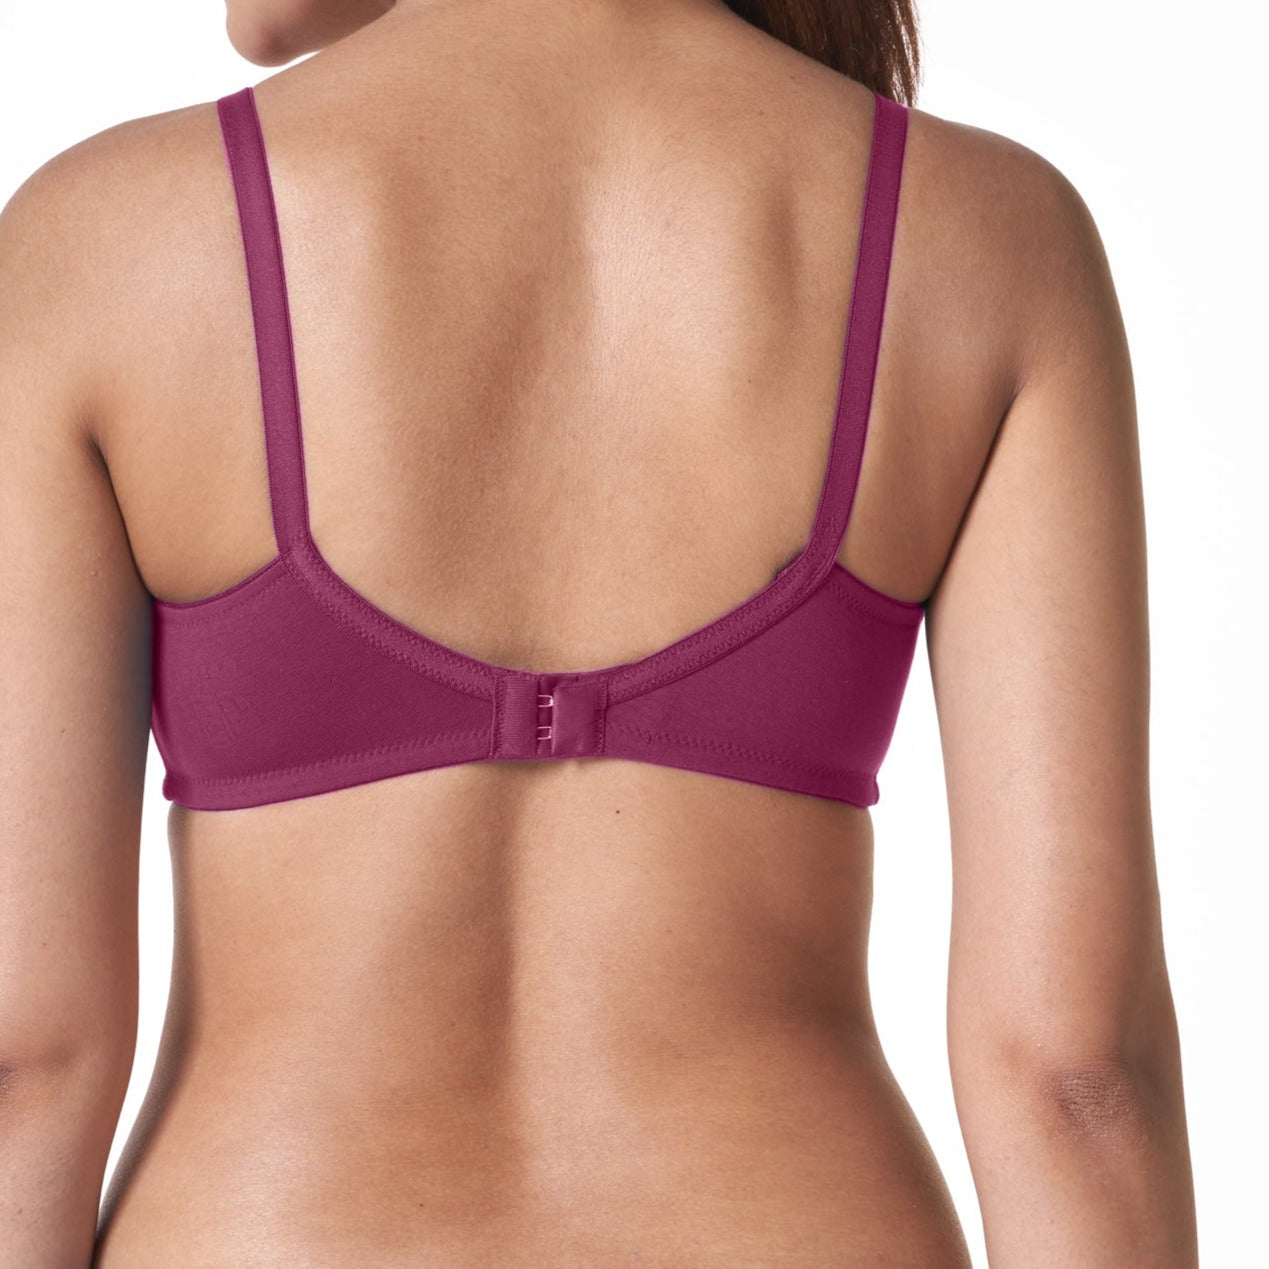 Blossom Inners - Our Shouldering Bra is sewn for higher coverage